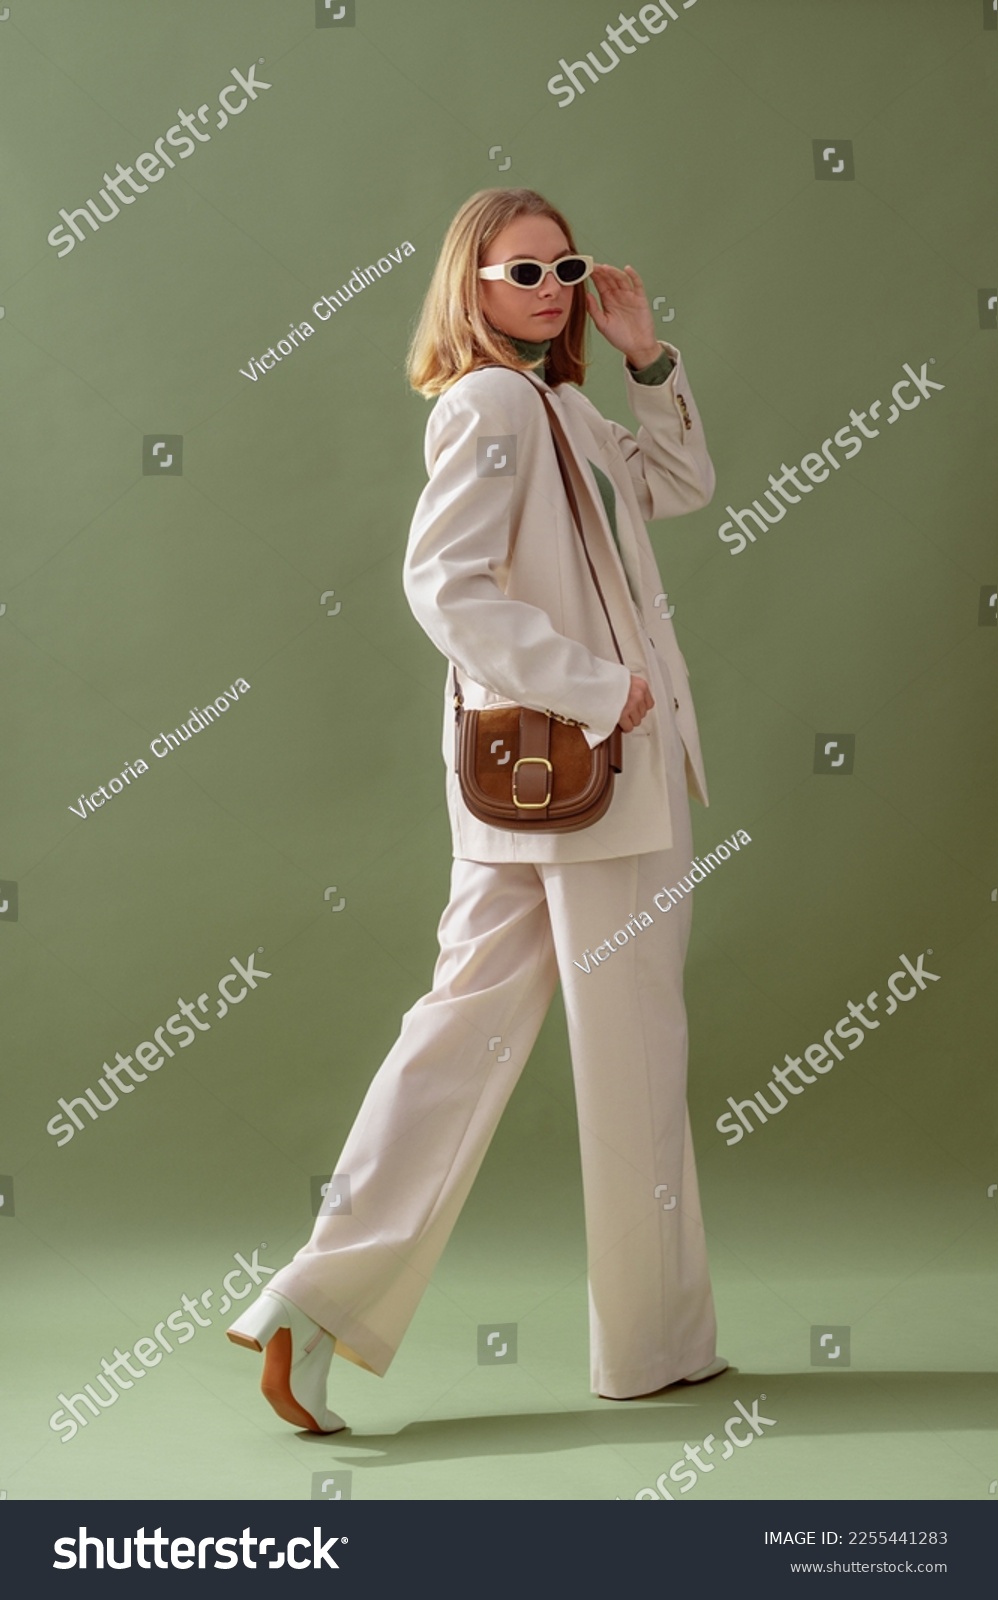 Fashionable confident woman wearing elegant white suit with blazer, wide leg trousers, trendy sunglasses, brown suede shoulder bag, posing on green background. Full-length studio fashion portrait #2255441283